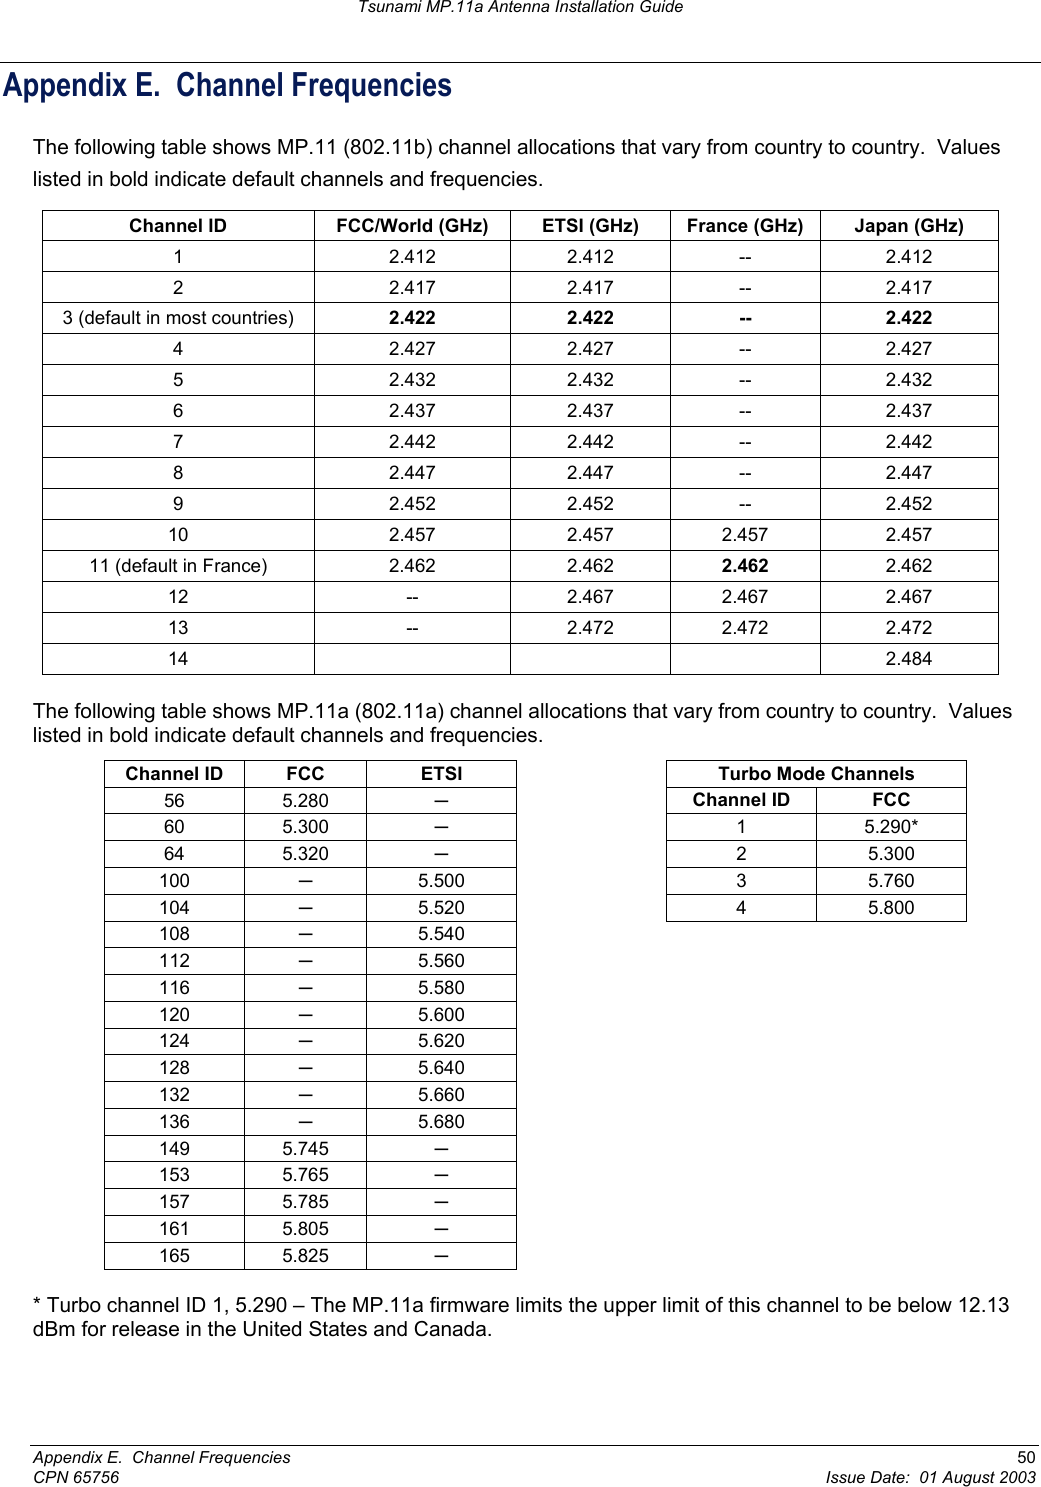 Tsunami MP.11a Antenna Installation Guide Appendix E.  Channel Frequencies The following table shows MP.11 (802.11b) channel allocations that vary from country to country.  Values listed in bold indicate default channels and frequencies. Channel ID  FCC/World (GHz)  ETSI (GHz)  France (GHz)  Japan (GHz) 1 2.412 2.412 -- 2.412 2 2.417 2.417 -- 2.417 3 (default in most countries)  2.422 2.422 --  2.422 4 2.427 2.427 -- 2.427 5 2.432 2.432 -- 2.432 6 2.437 2.437 -- 2.437 7 2.442 2.442 -- 2.442 8 2.447 2.447 -- 2.447 9 2.452 2.452 -- 2.452 10 2.457 2.457 2.457 2.457 11 (default in France)  2.462  2.462  2.462  2.462 12 -- 2.467 2.467 2.467 13 -- 2.472 2.472 2.472 14    2.484  The following table shows MP.11a (802.11a) channel allocations that vary from country to country.  Values listed in bold indicate default channels and frequencies. Channel ID  FCC  ETSI    Turbo Mode Channels 56 5.280  ─   Channel ID  FCC 60 5.300  ─   1  5.290* 64 5.320  ─   2  5.300 100  ─ 5.500   3  5.760 104  ─ 5.520   4  5.800 108  ─ 5.540    112  ─ 5.560    116  ─ 5.580    120  ─ 5.600    124  ─ 5.620    128  ─ 5.640    132  ─ 5.660    136  ─ 5.680    149 5.745  ─    153 5.765  ─    157 5.785  ─    161 5.805  ─    165 5.825  ─     * Turbo channel ID 1, 5.290 – The MP.11a firmware limits the upper limit of this channel to be below 12.13 dBm for release in the United States and Canada.Appendix E.  Channel Frequencies  50 CPN 65756  Issue Date:  01 August 2003 